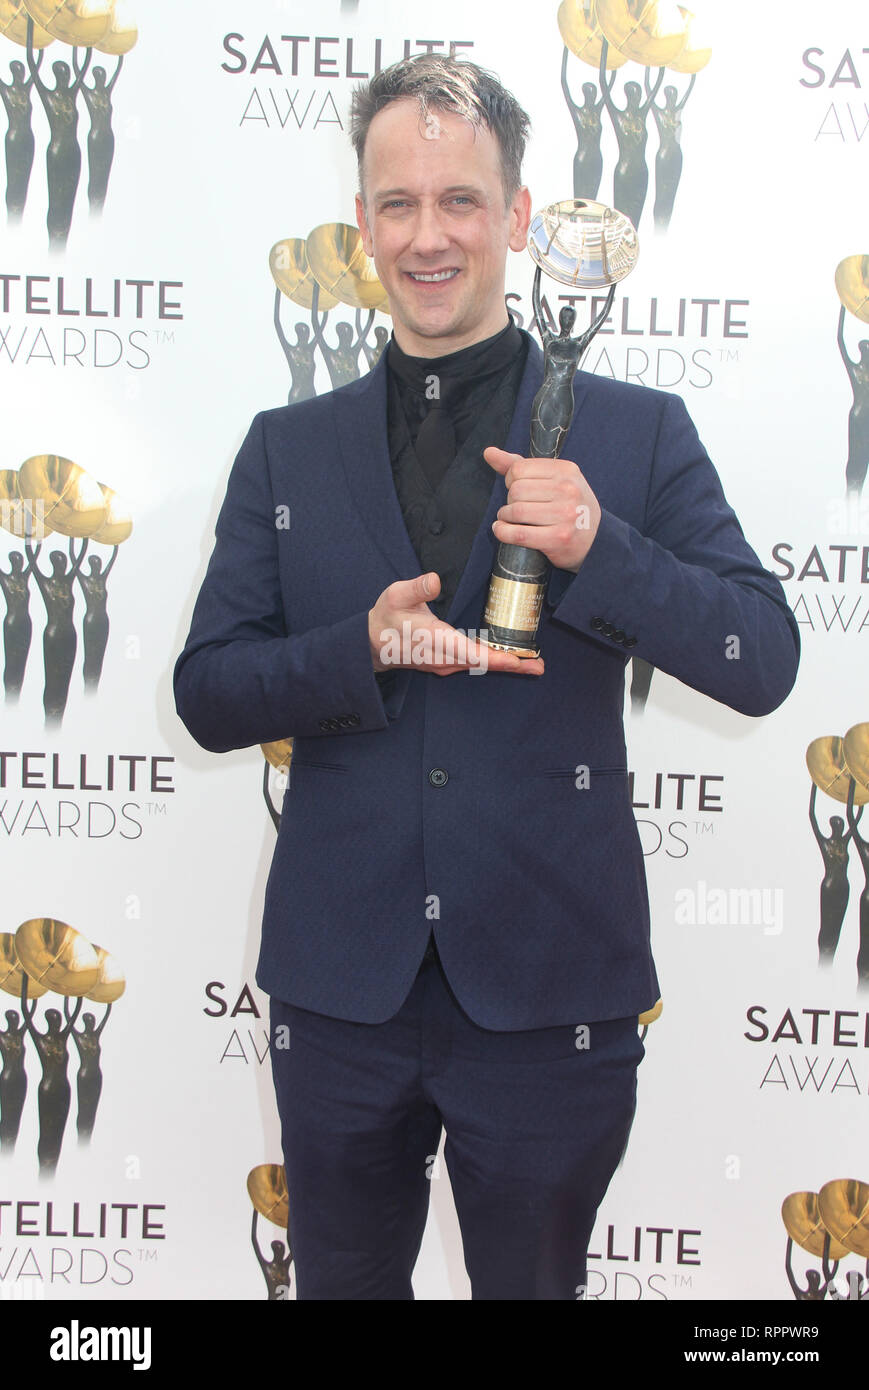 02/22/2019 The 23rd Satellite Awards held at the Mondrian Los Angeles in Los Angeles, CA Photo by Hiro Katoh / HollywoodNewsWire.co Stock Photo